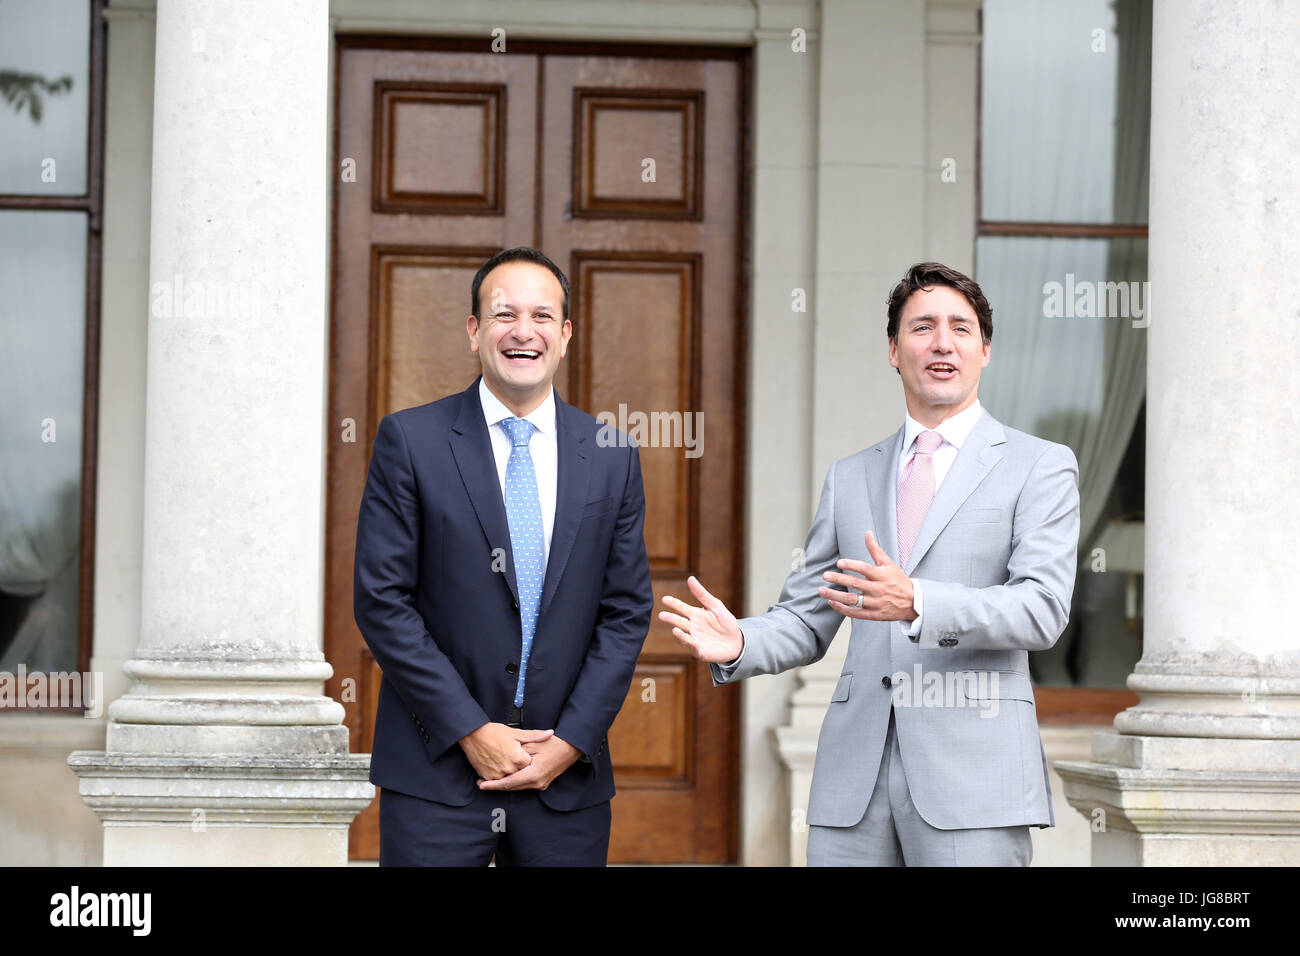 Dublin, Ireland. 4th July, 2017. Justin Trudeau Meets Leo Varadkar in Dublin. The Canadian Prime Minister, Justin Trudeau, today met with Taoiseach and Fine Gael party leader(Prime Minister) Leo Varadkar(left), at Farmleigh House in Dublin. Mr. Trudeau is on a three day visit andÊis expected to discuss trade between the two countries and the implications of Brexit and a possible hard border, for the Irish economy and its relations with the United Kingdom. Mr Varadkar is Ireland's first gay political leader. Photo: Sam Boal/RollingNews.ie/Alamy Live News Stock Photo